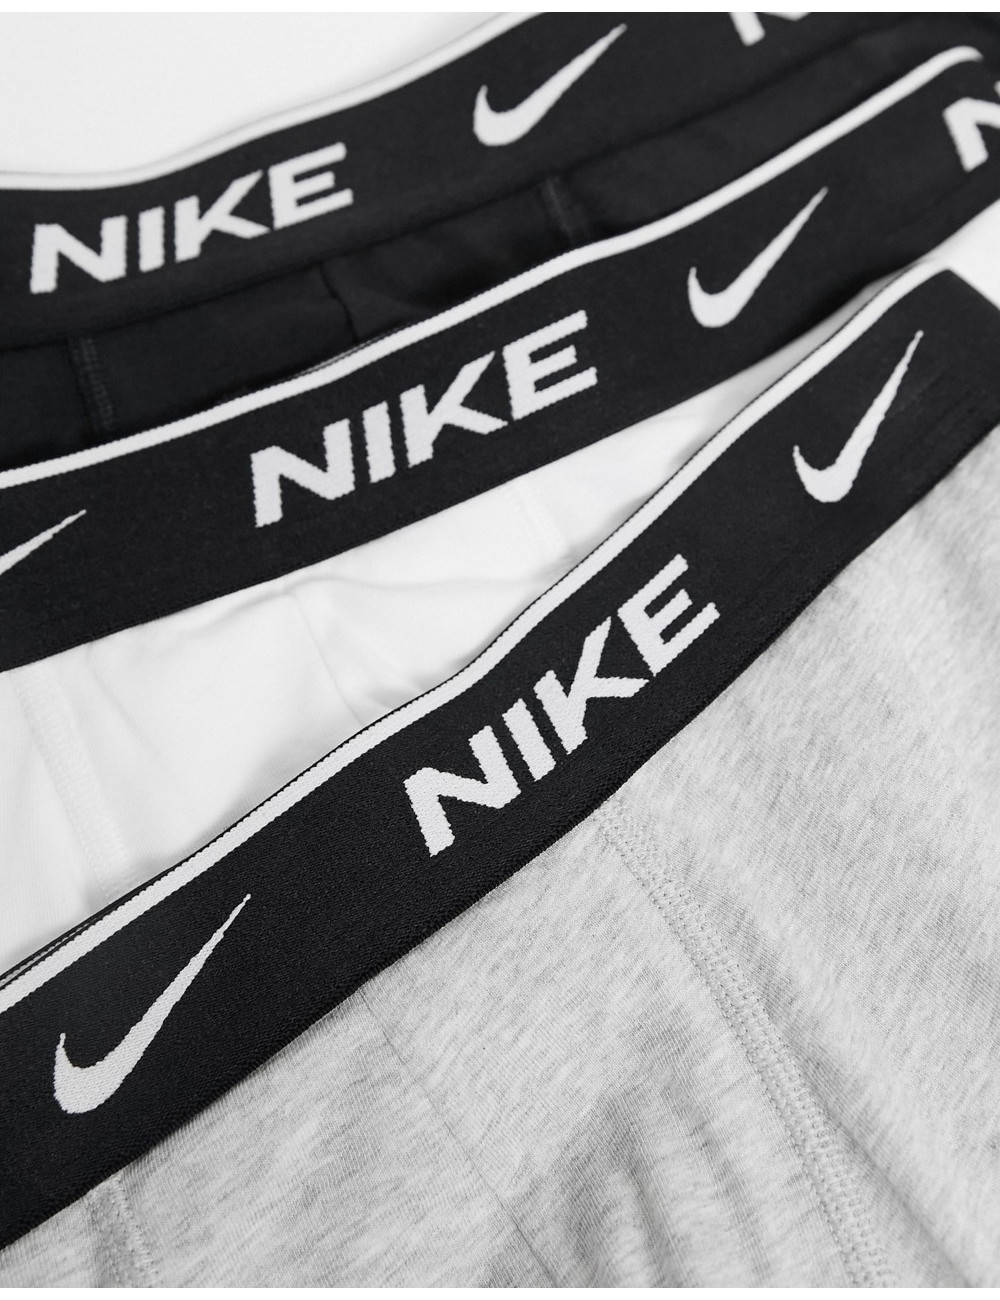 Nike boxer brief 3 pack in...